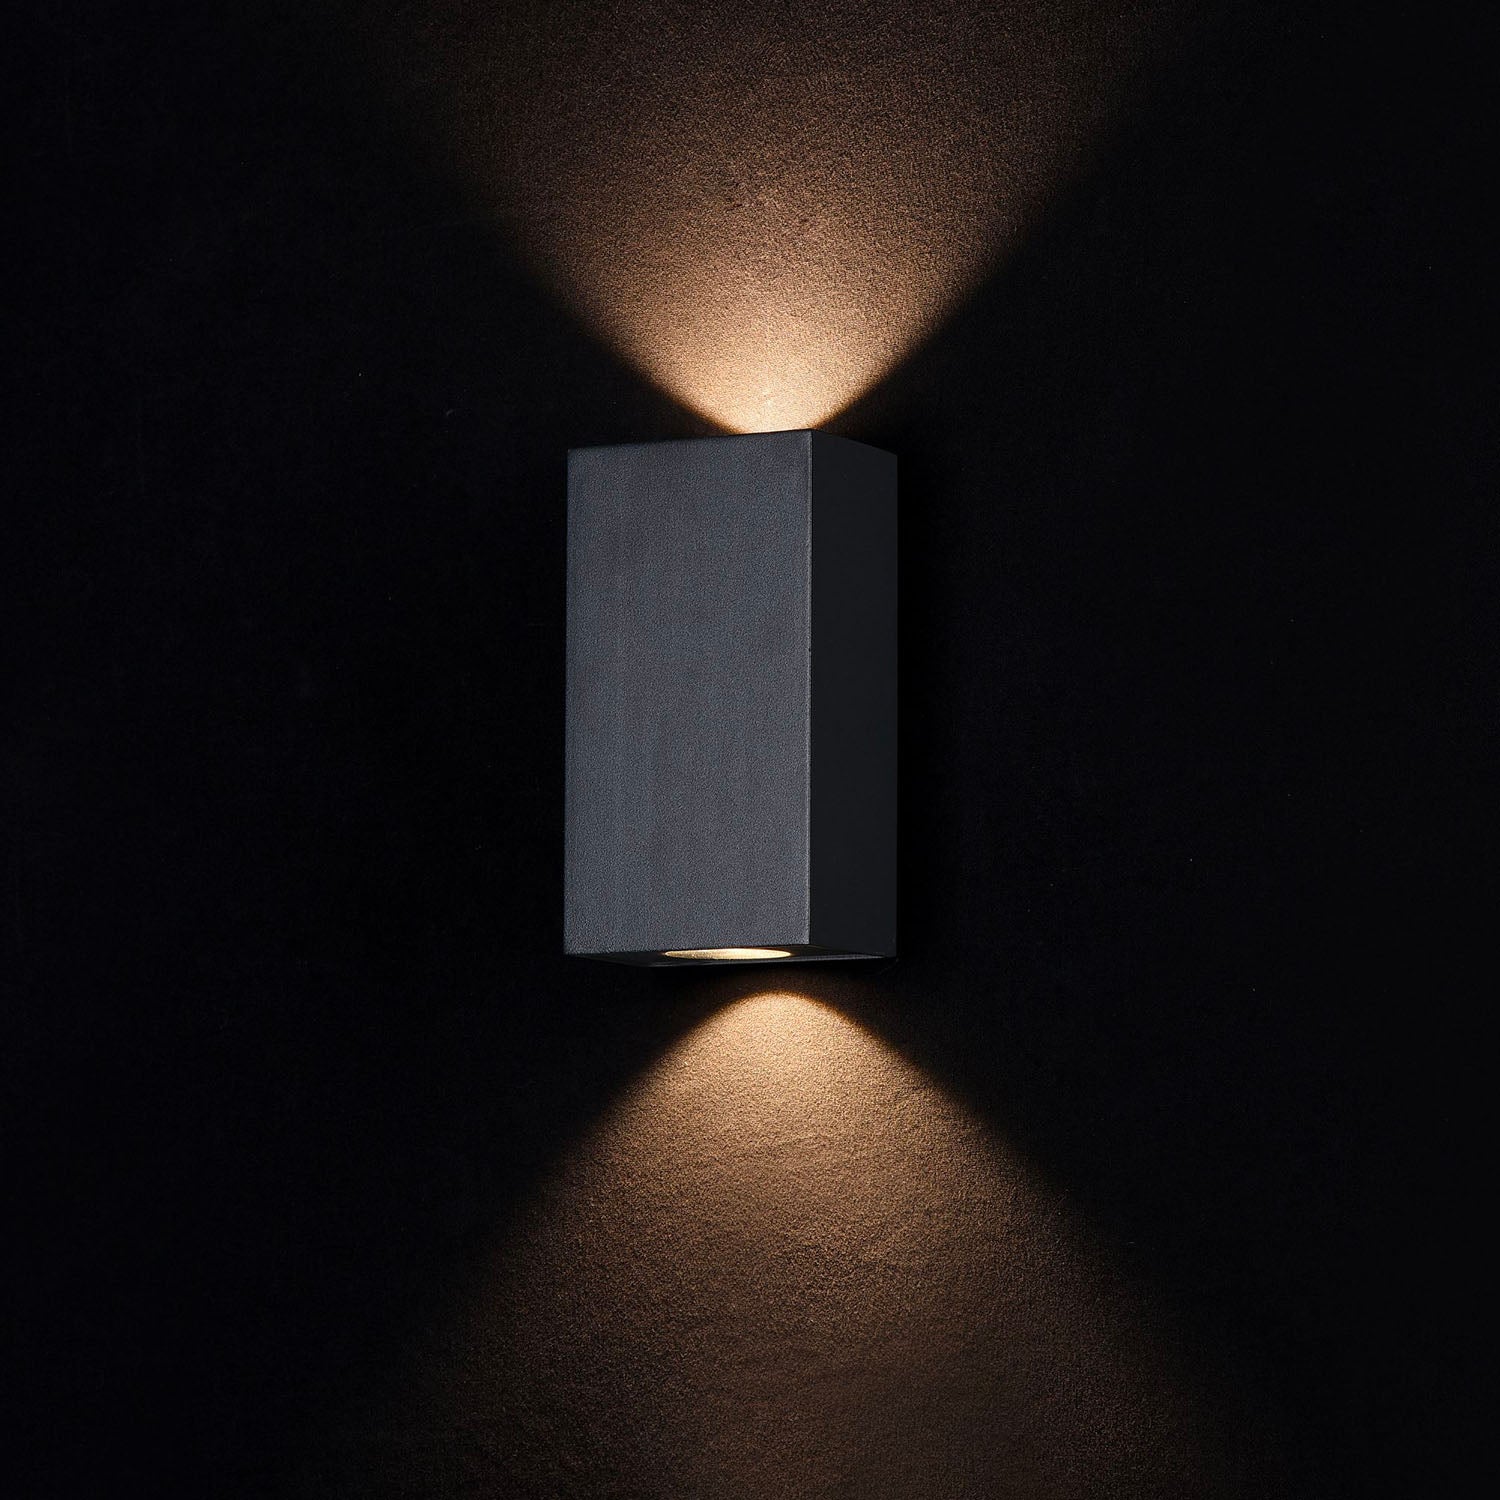 TIMES SQUARE - Black exterior wall light with waterproof rectangle design